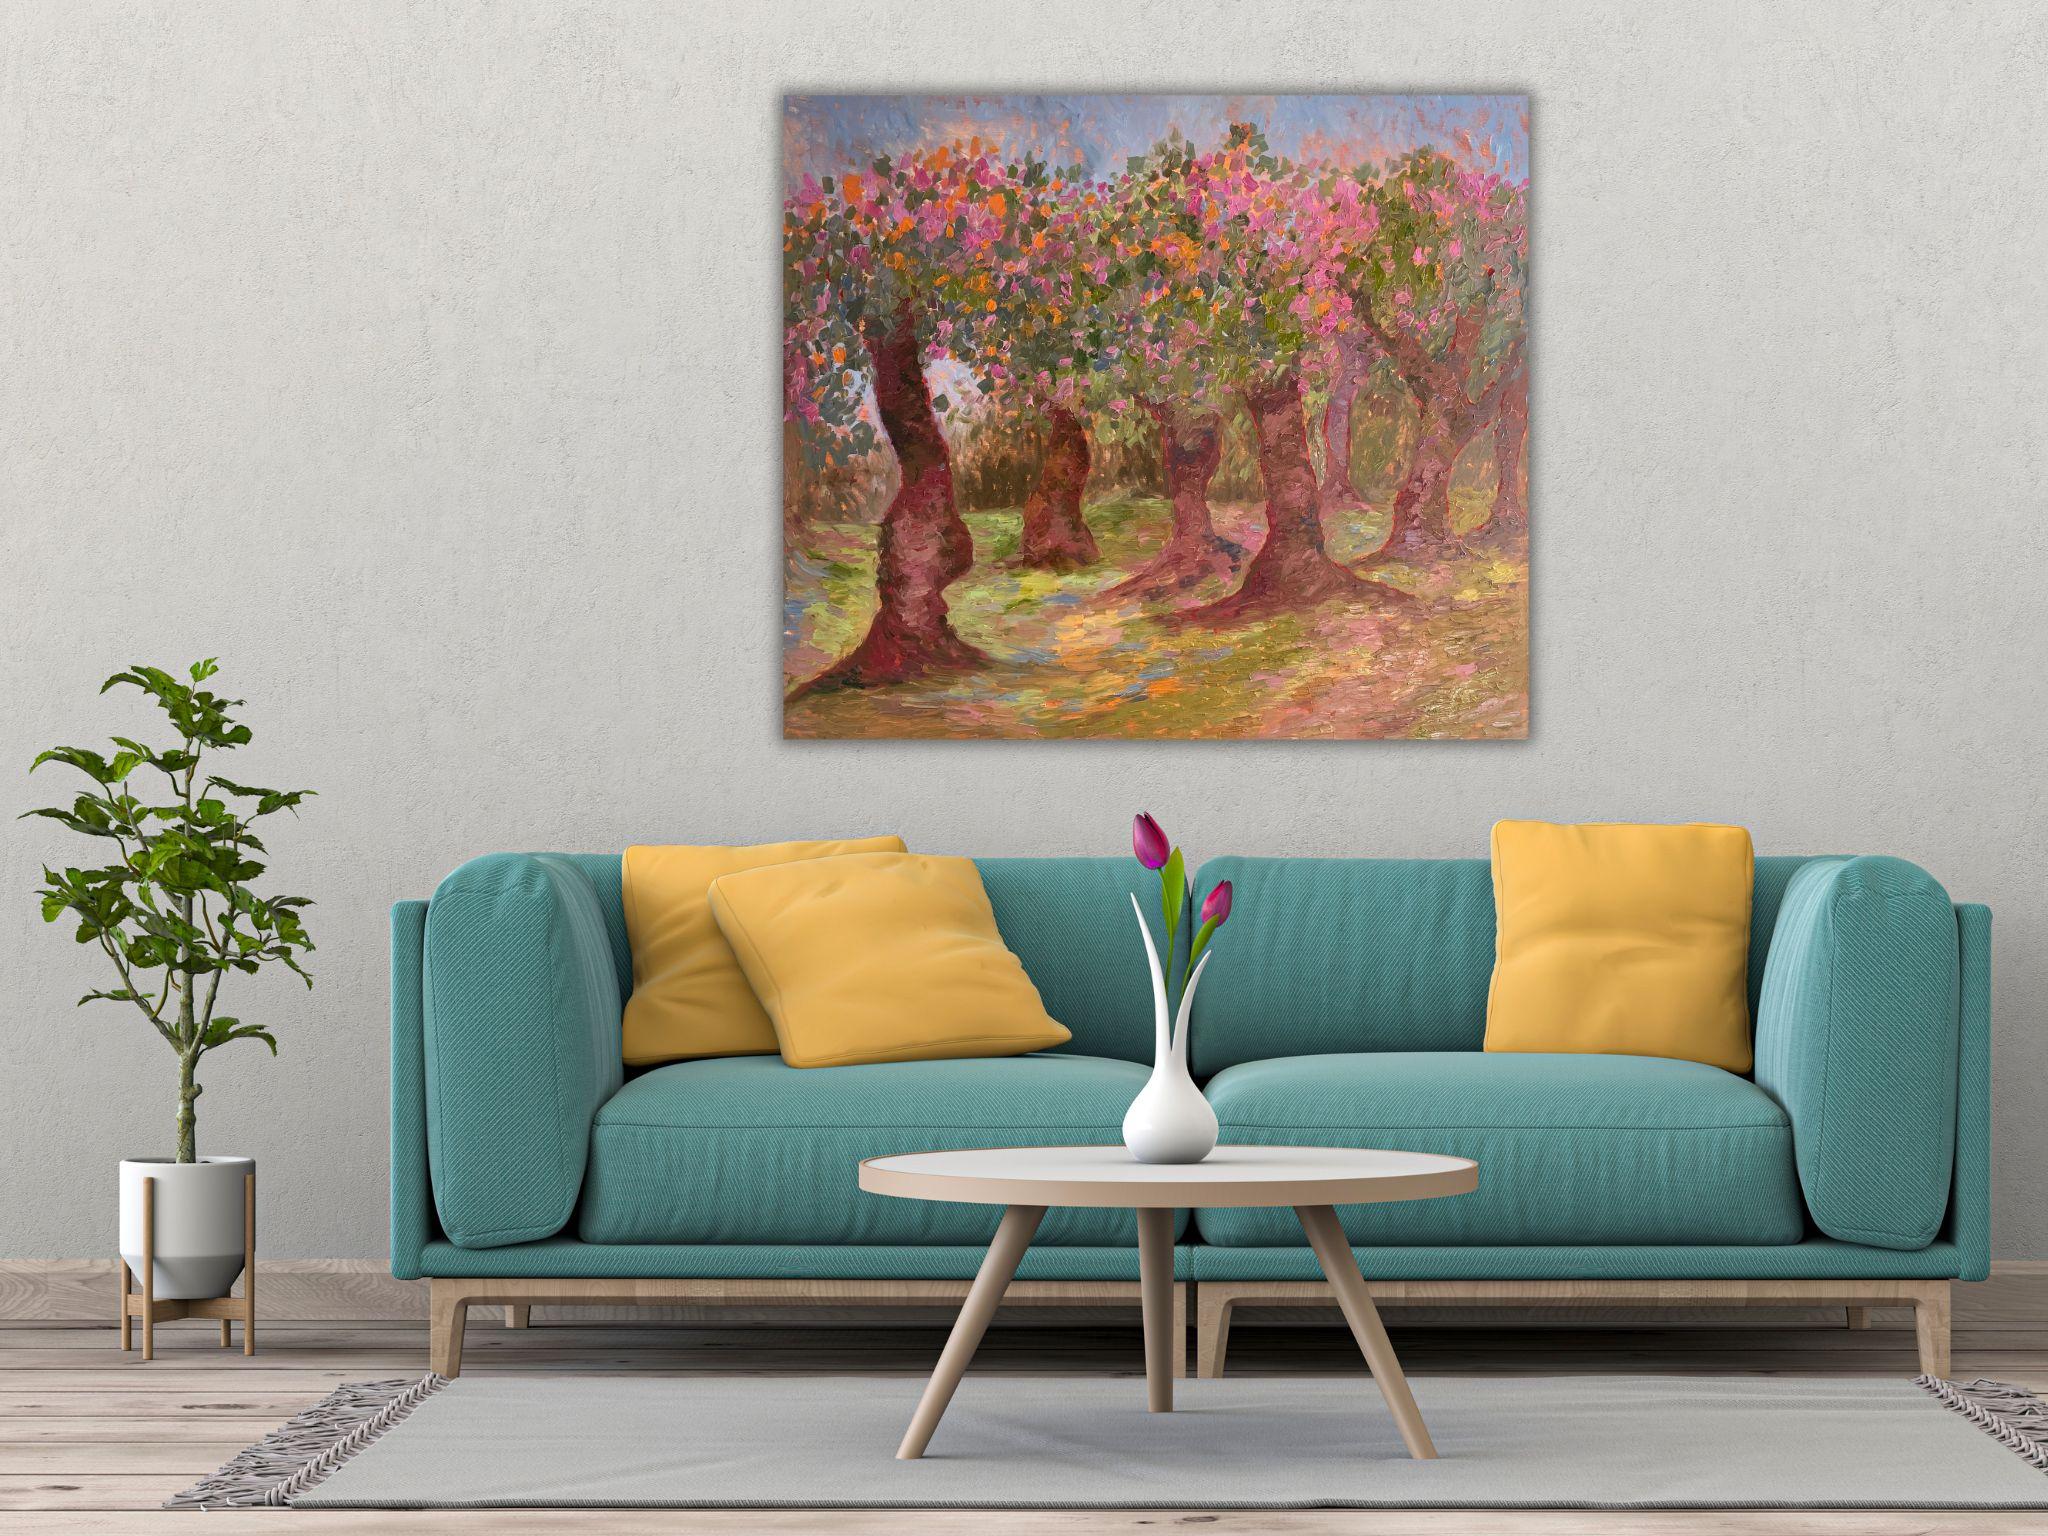 Landscape Painting - APPLES GARDEN, oil on canvas - 40*32 in (100*80cm) For Sale 14